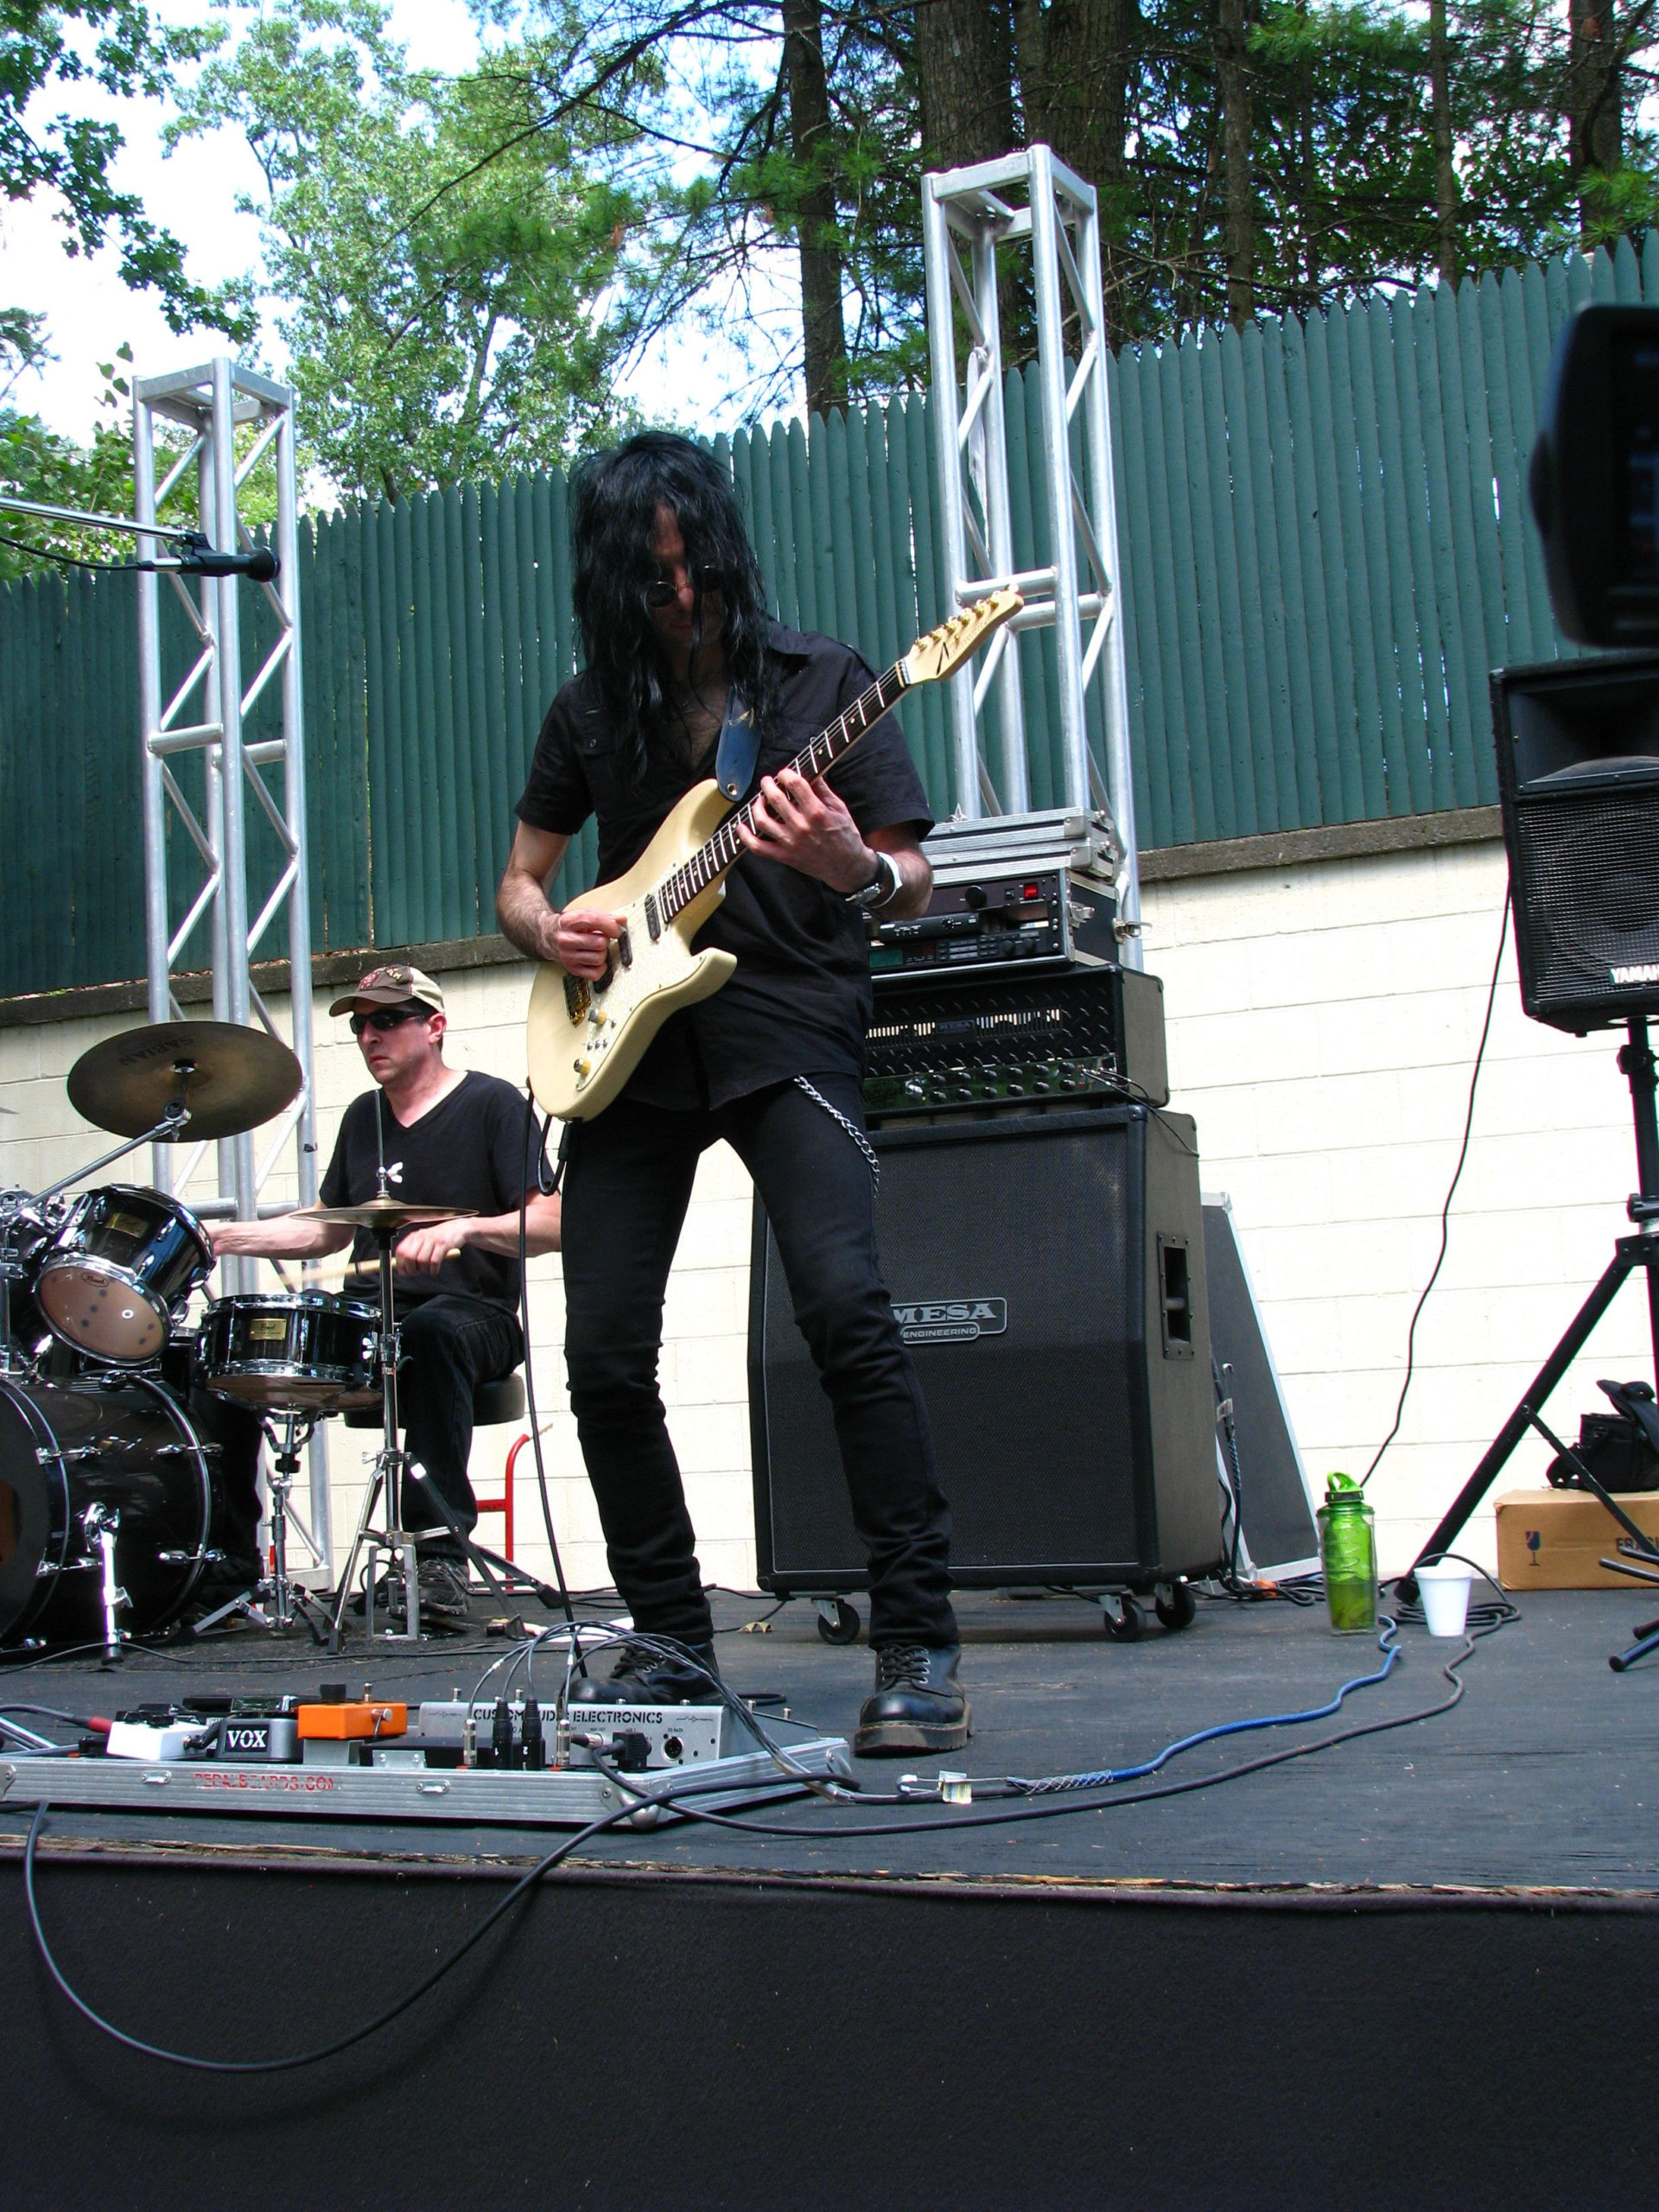 Mike Campese Band - Six Flags, Great Escape Show. Lake George, NY. Pic 5.